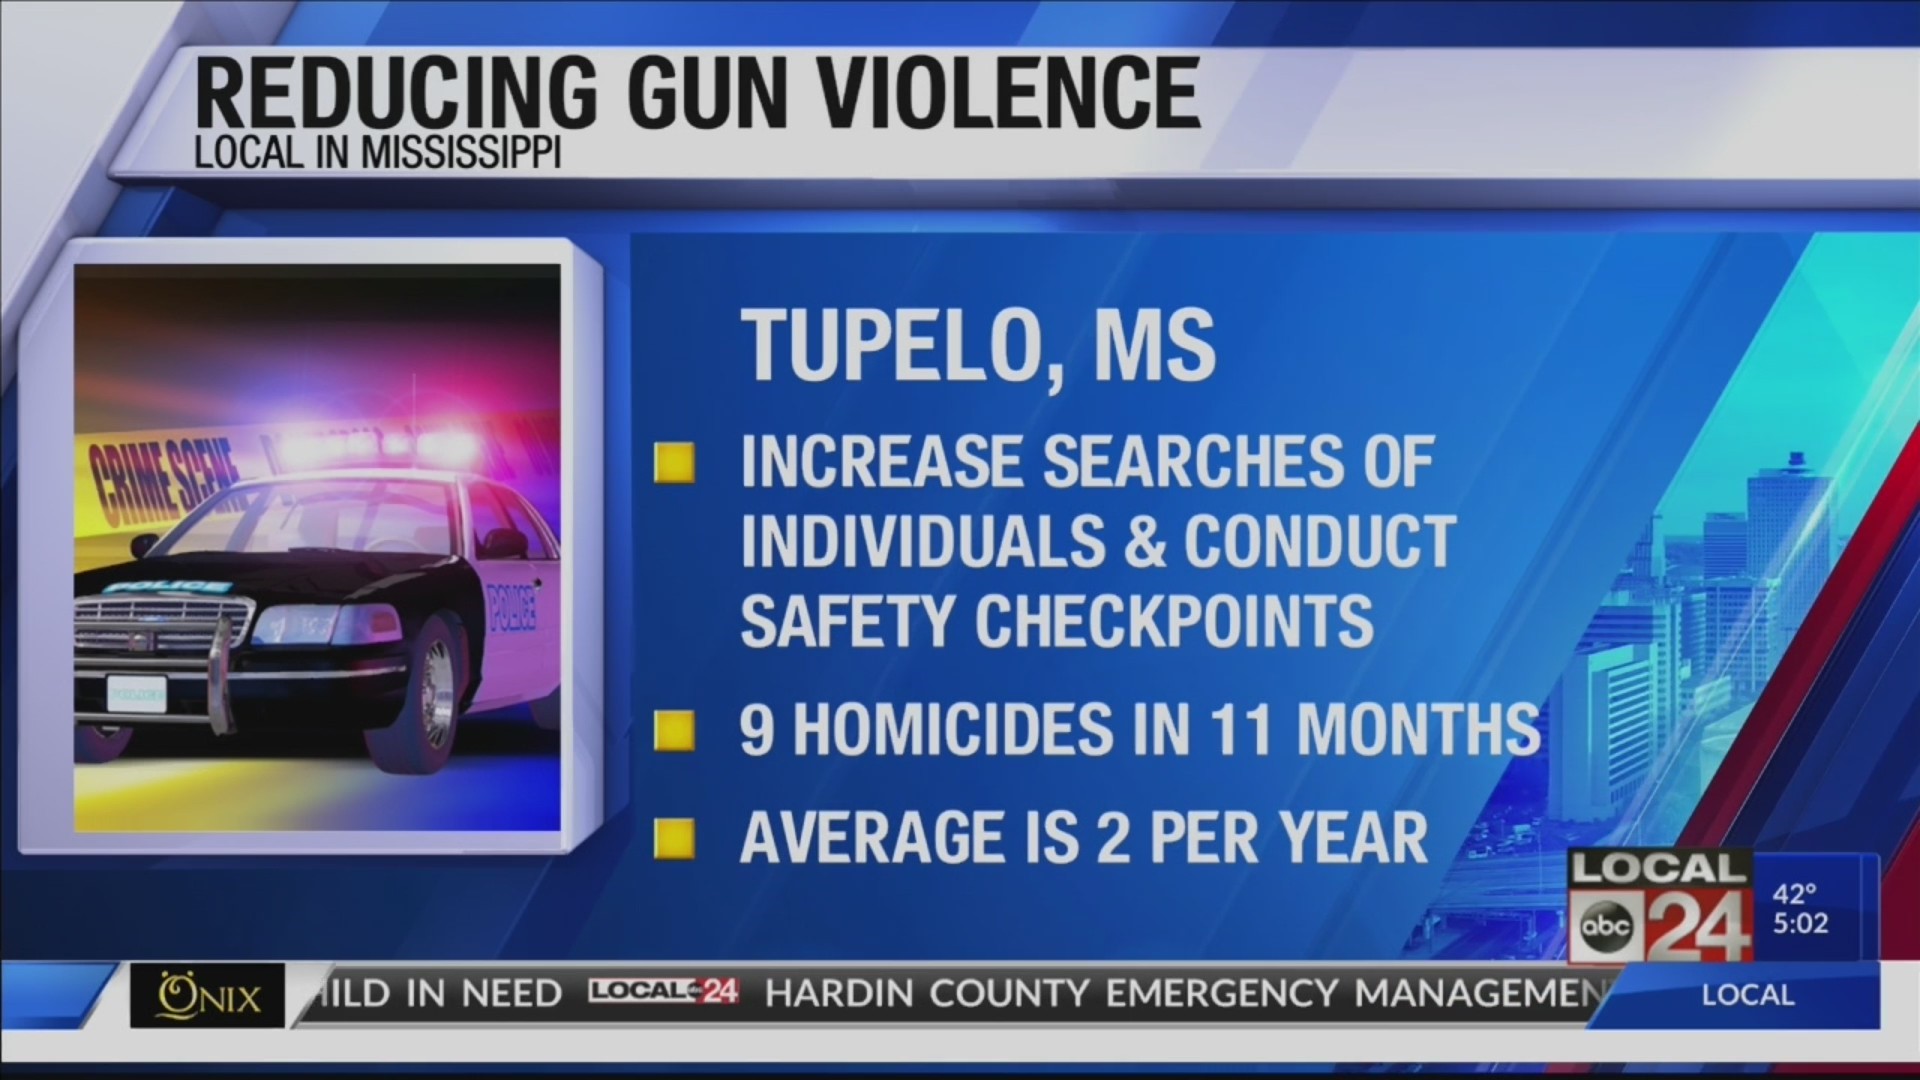 Tupelo Police to increase searches & safety checkpoints in wake of spike in homicides